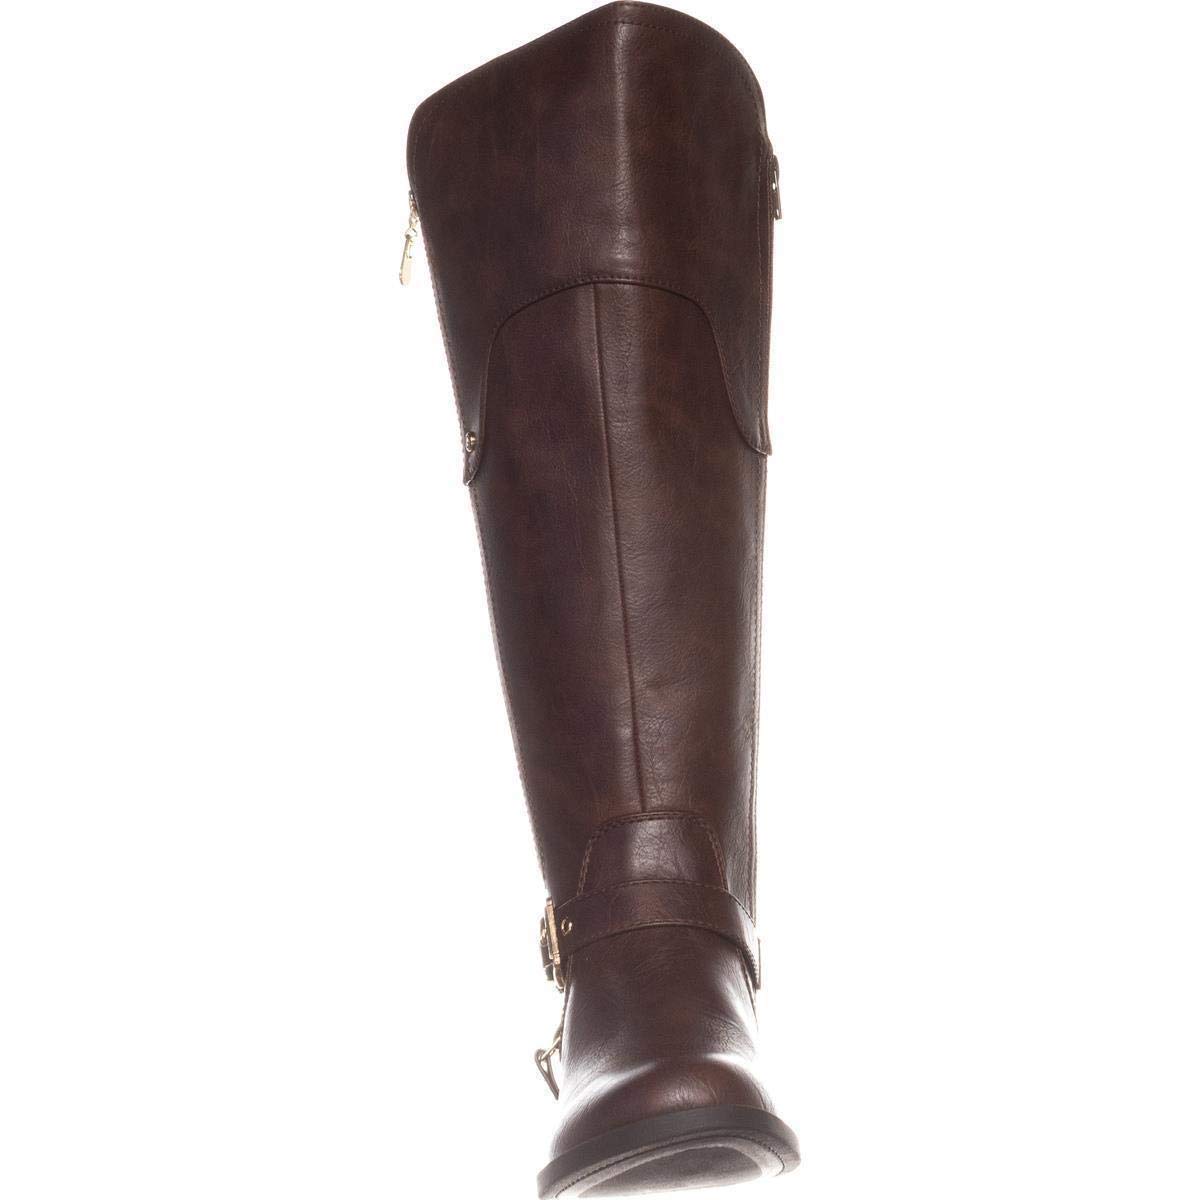 G by Guess Womens Boots in Brown Color, Size 6.5 OGG | eBay